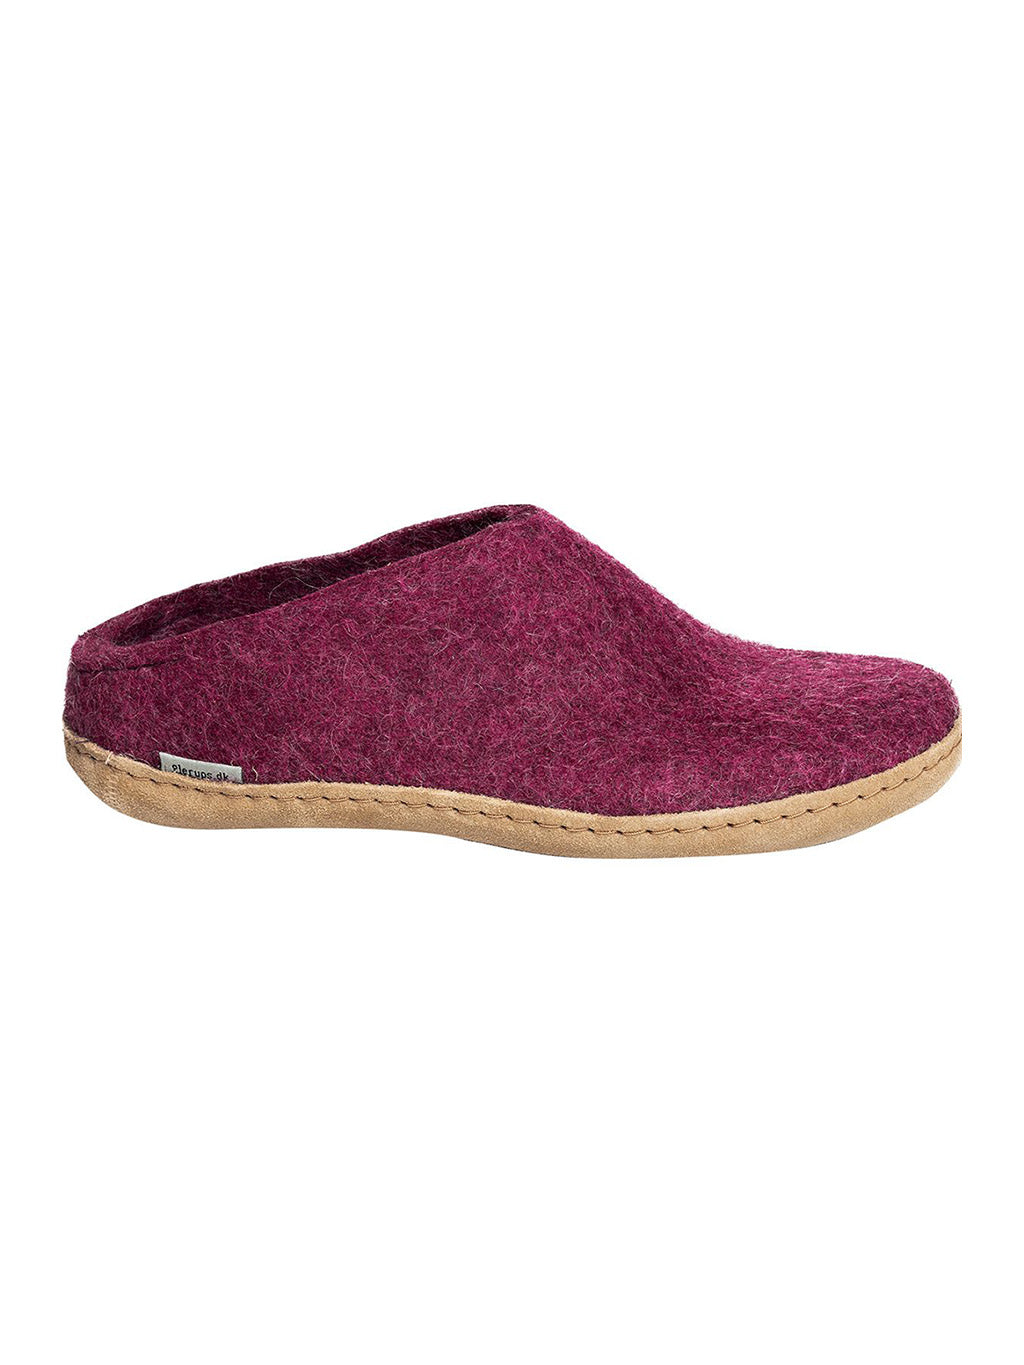 Cranberry wool slipper with leather sole